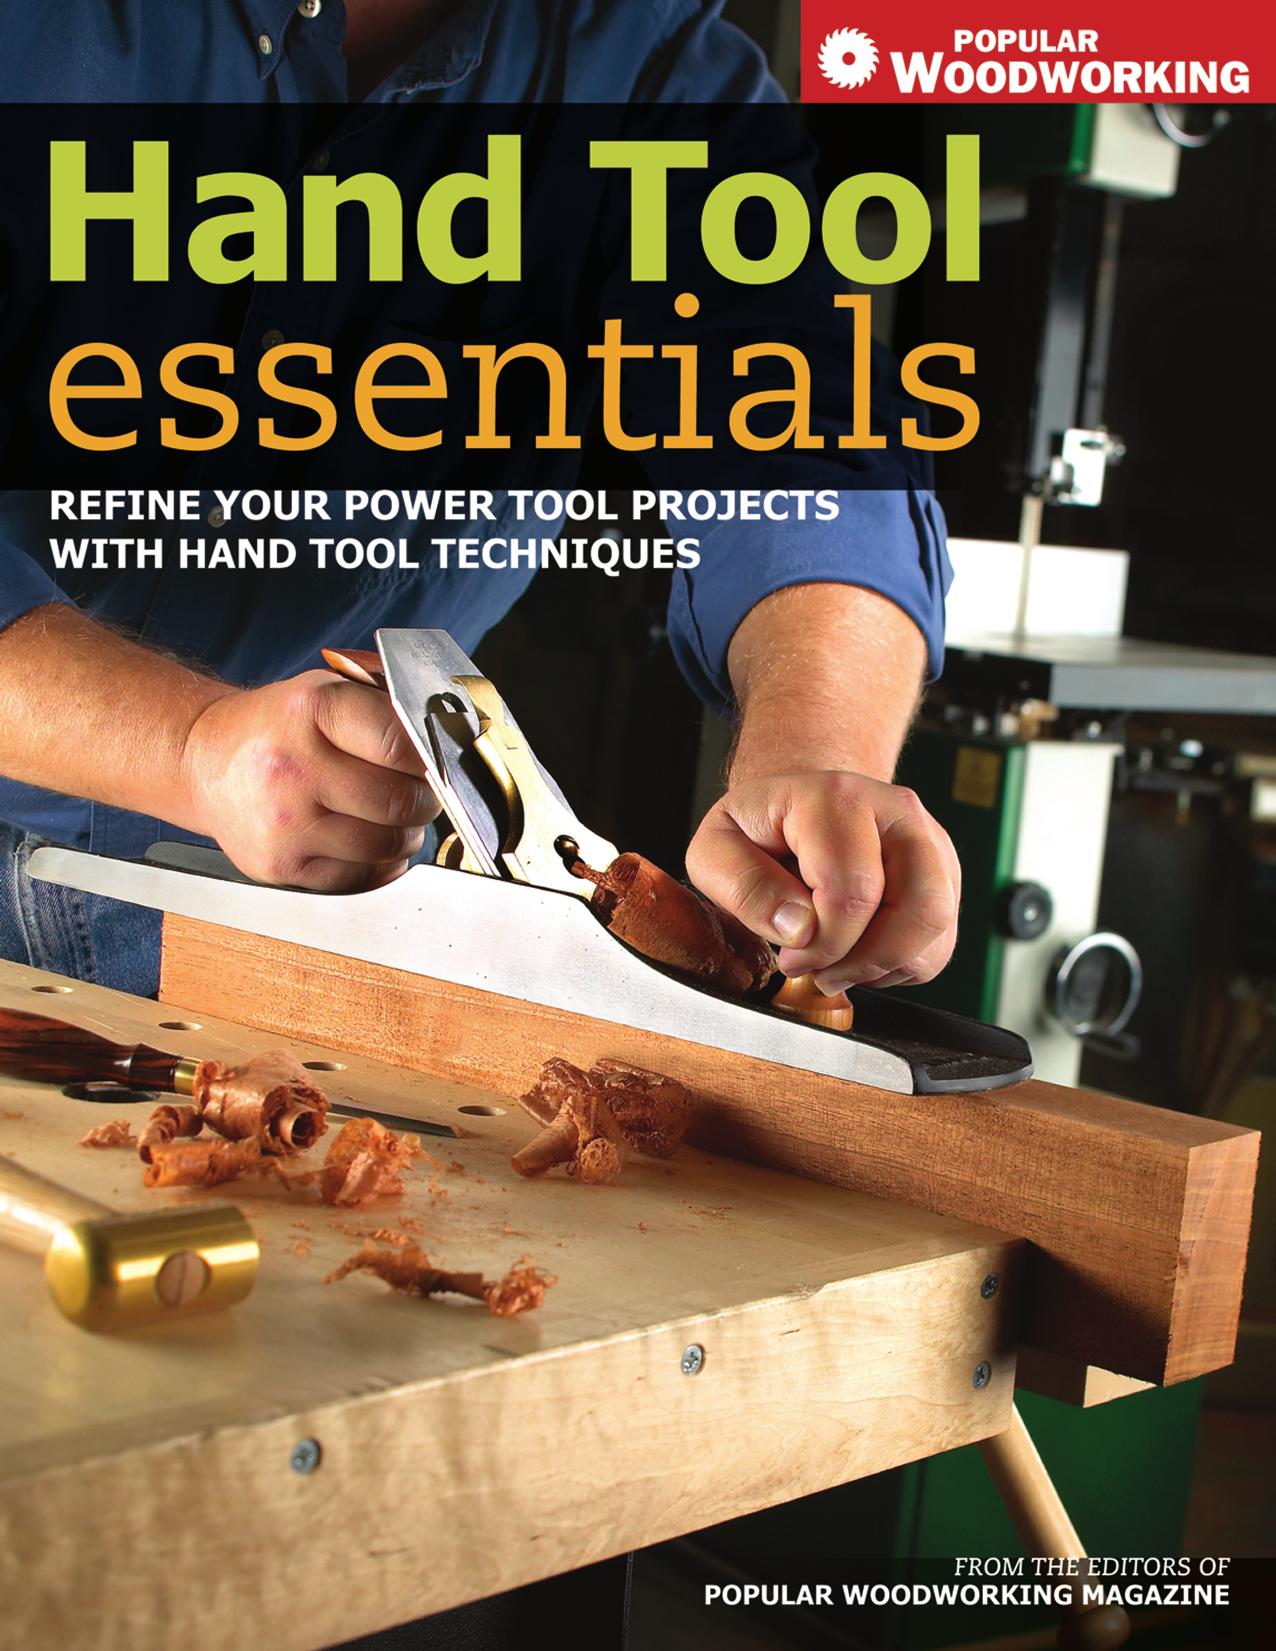 Hand Tool Essentials  Refine Your Power Tool Projects with Hand Tool Techniques 2007